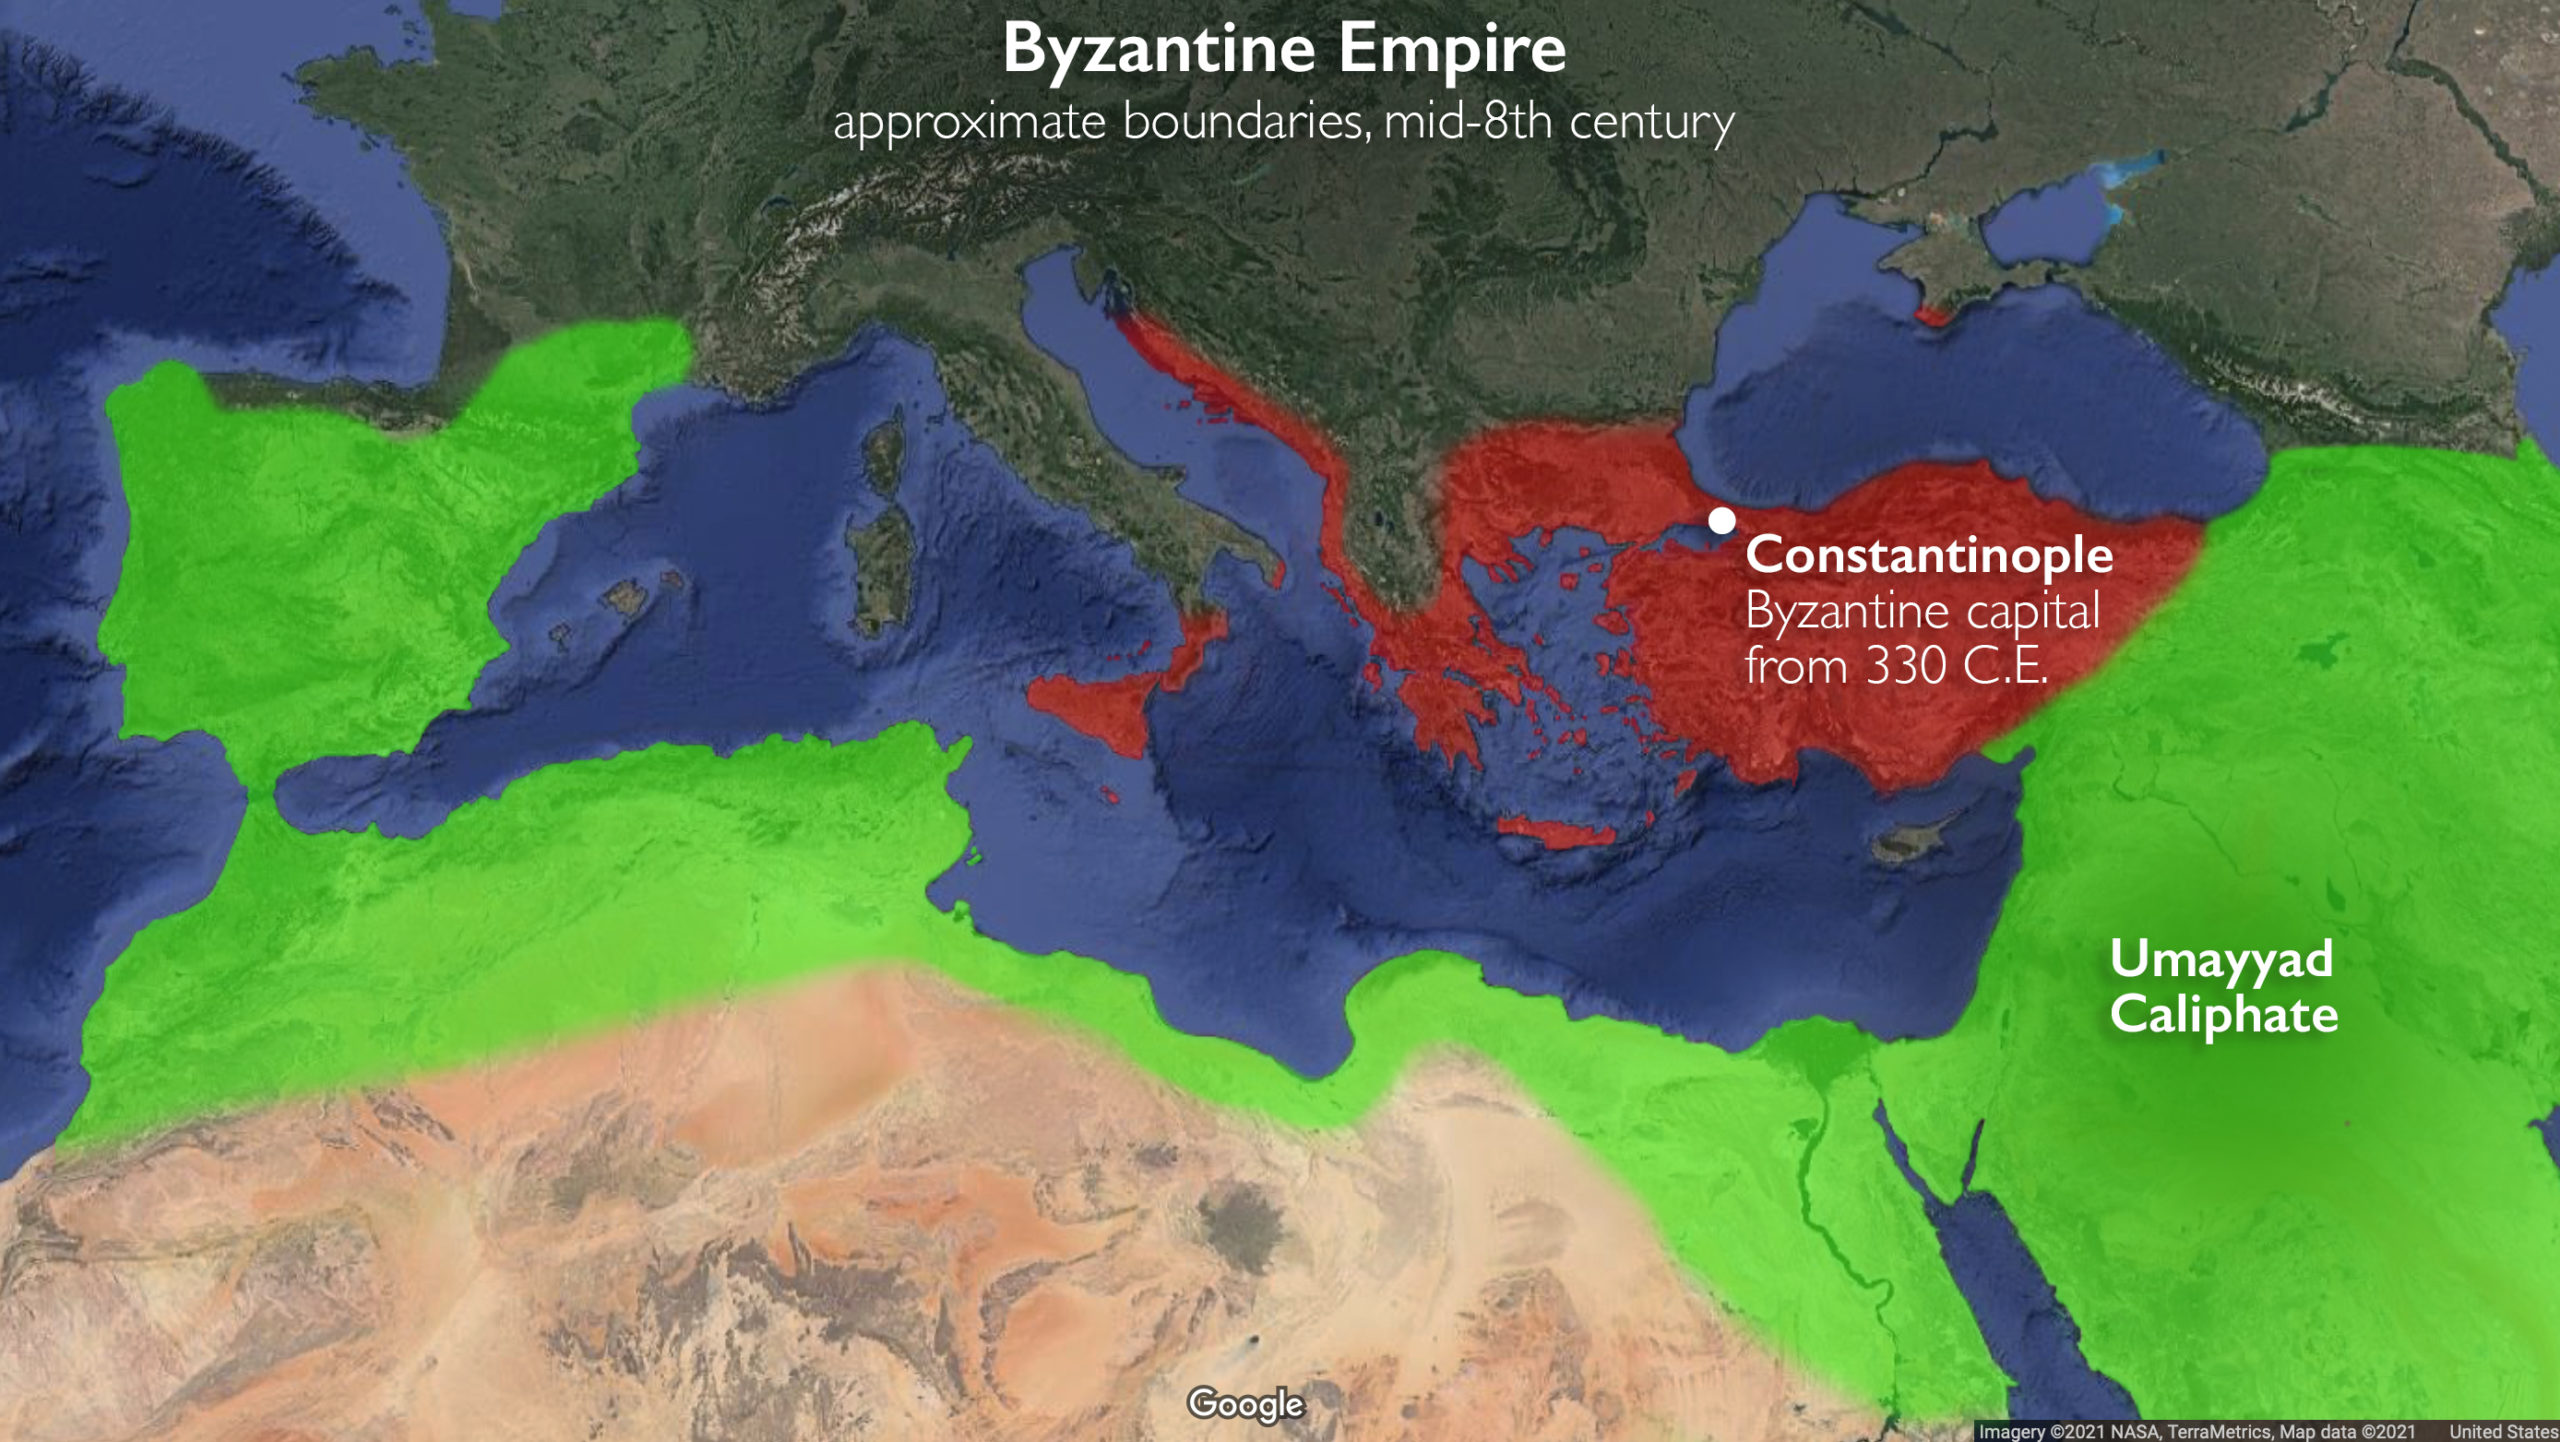 Map of Byzantine Empire, approximate boundaries, mid-8th c. (underlying map © Google)